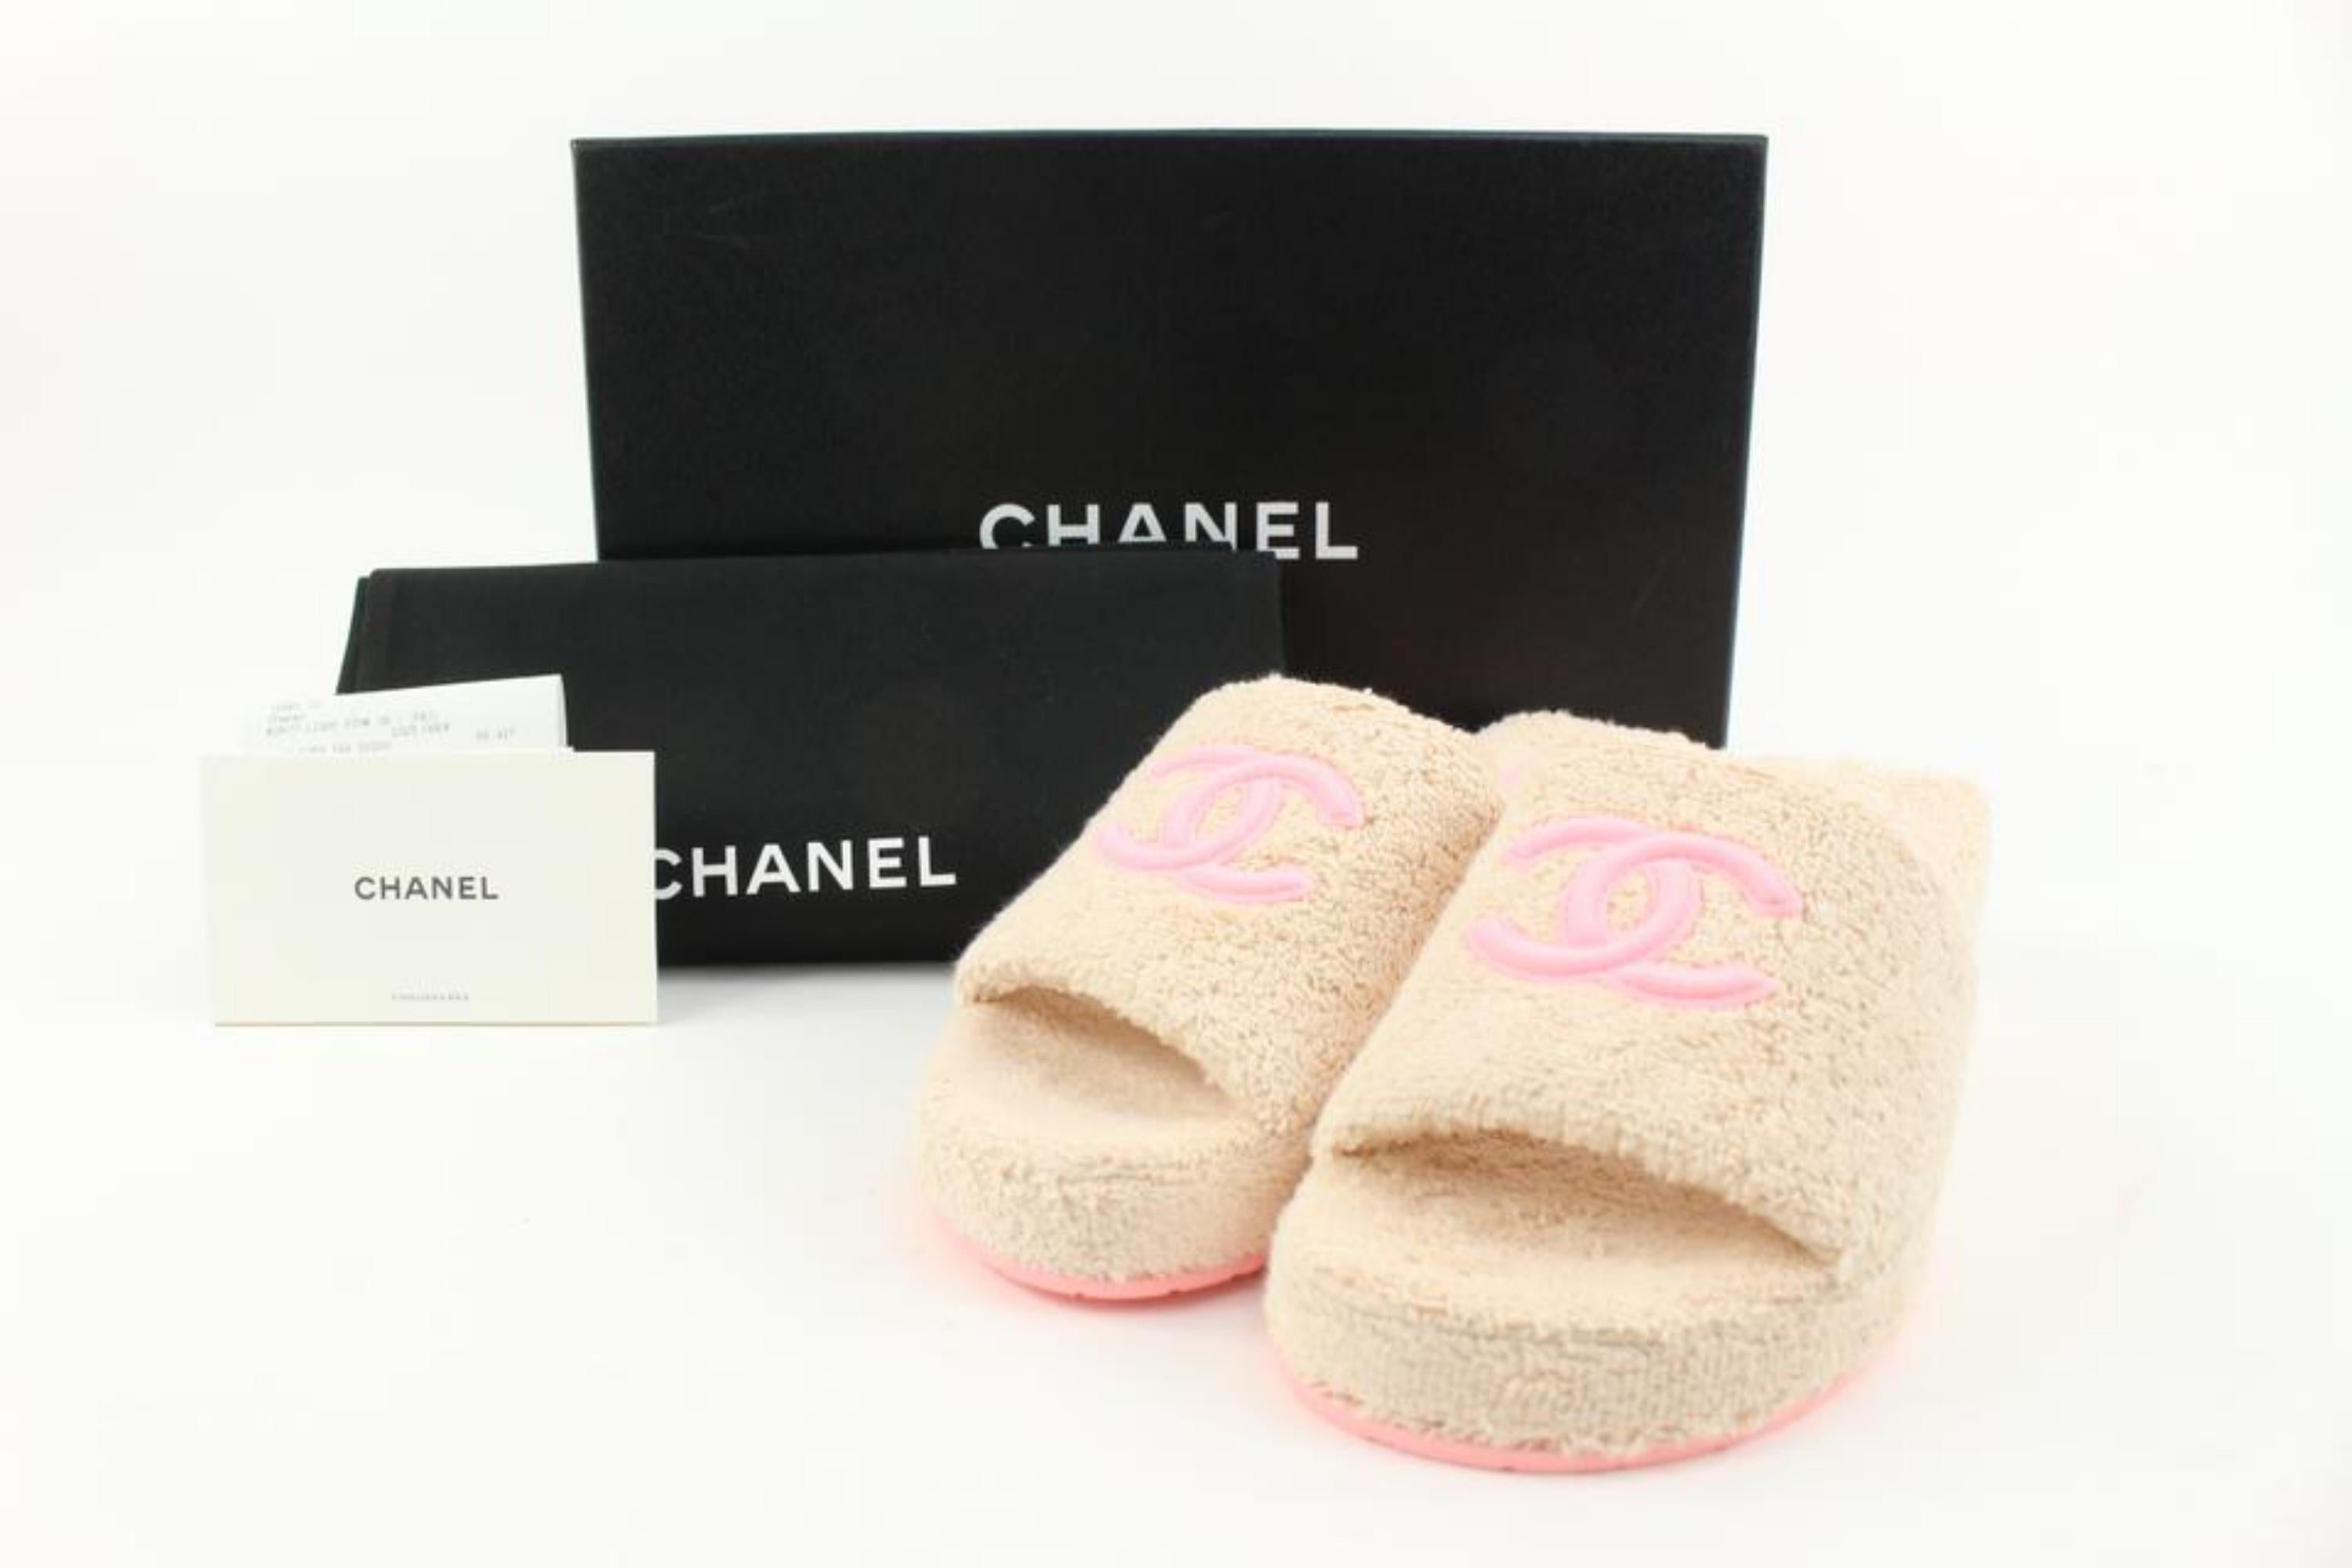 Chanel 22C Size 38 Pink Terry Cloth Wedge Sandal CC Mule Slides 11ck228s
Date Code/Serial Number: A 638558
Made In: Italy
Measurements: Length:  9.5